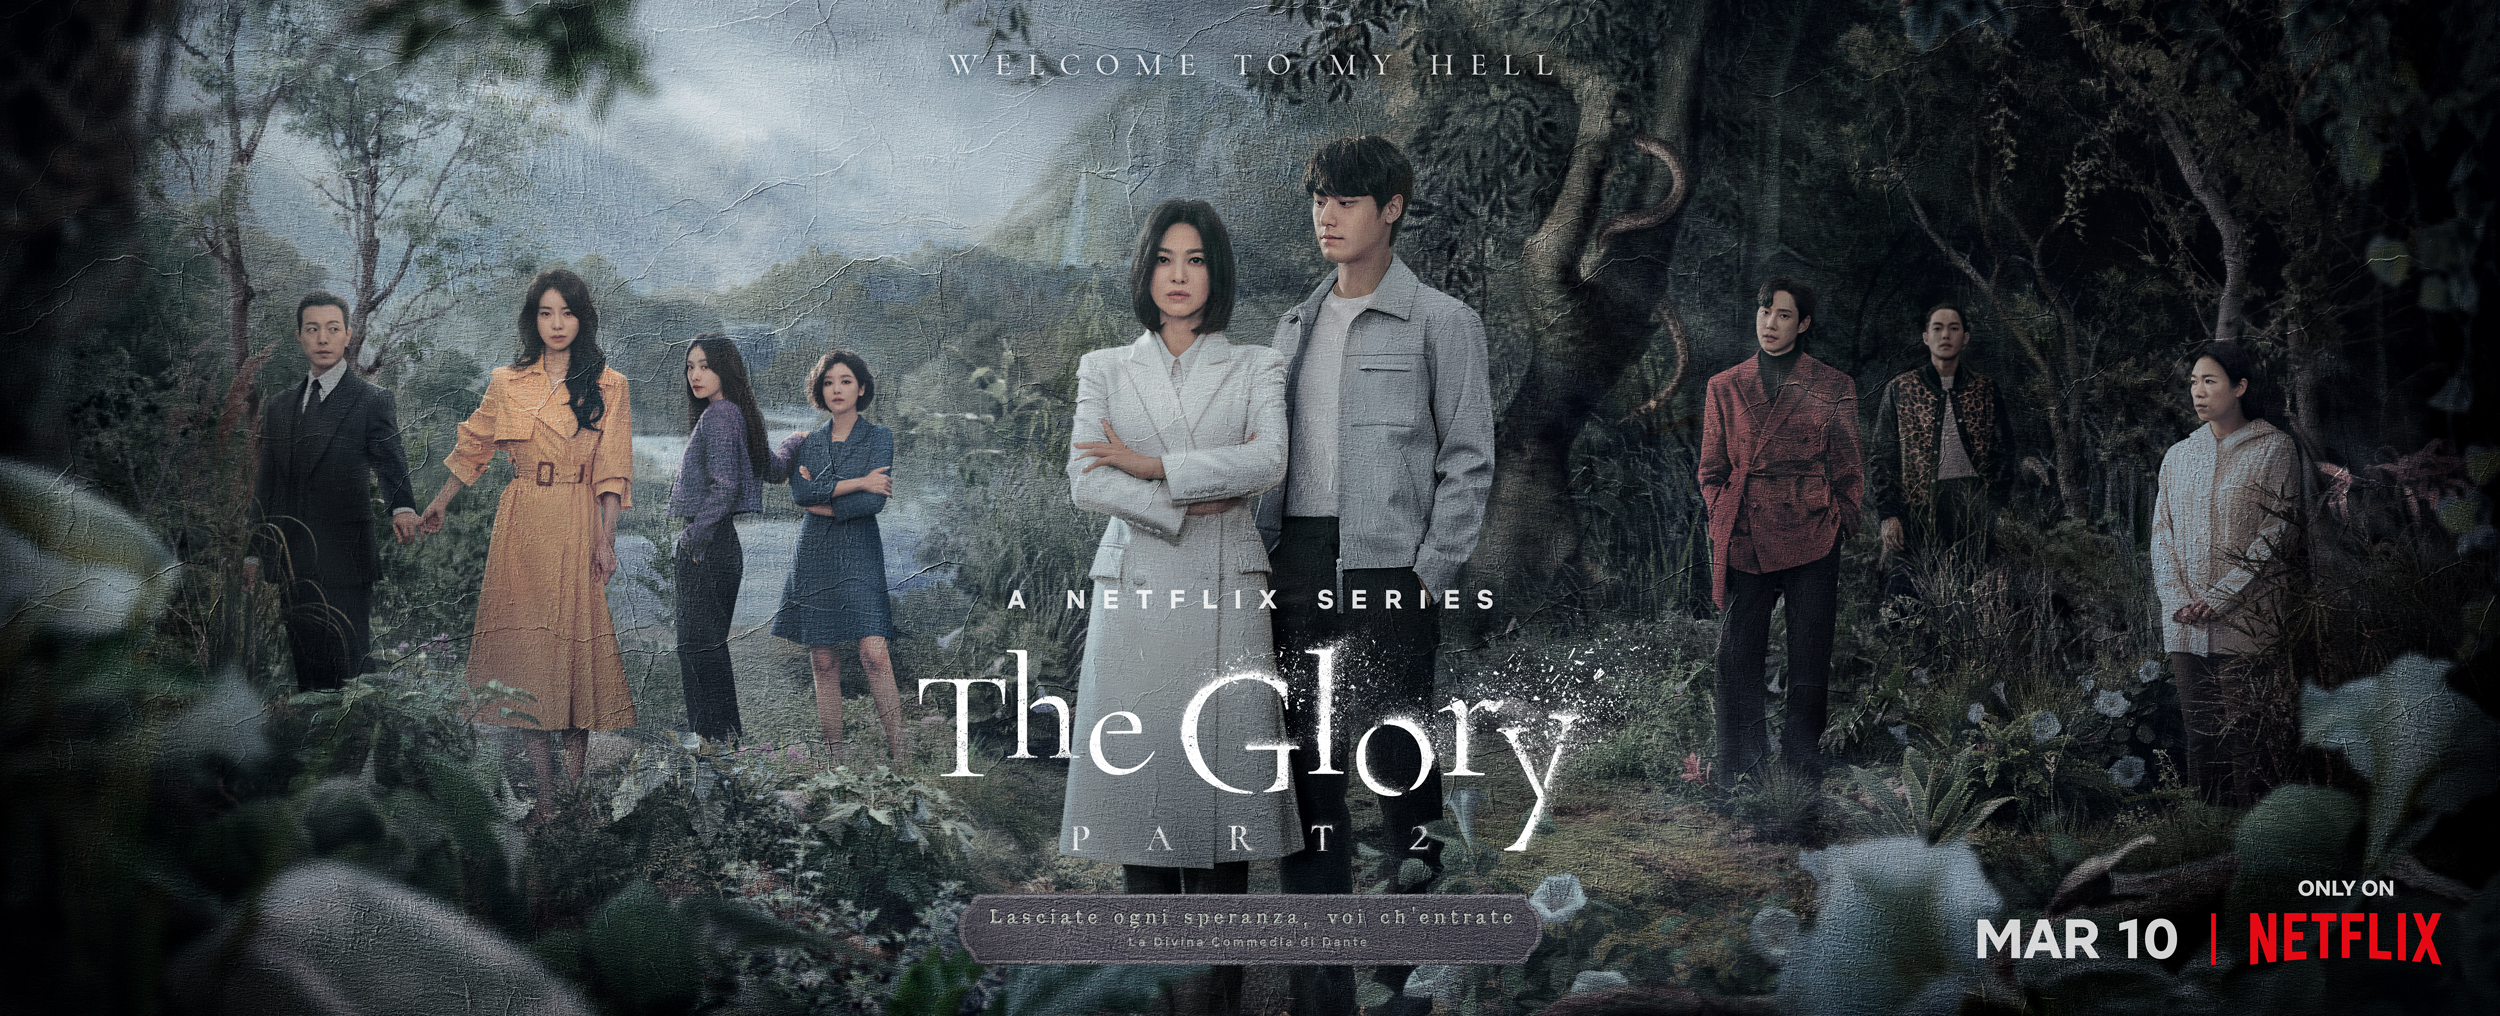 WATCH: Netflix Releases Main Trailer and Key Art for "The Glory Part 2"